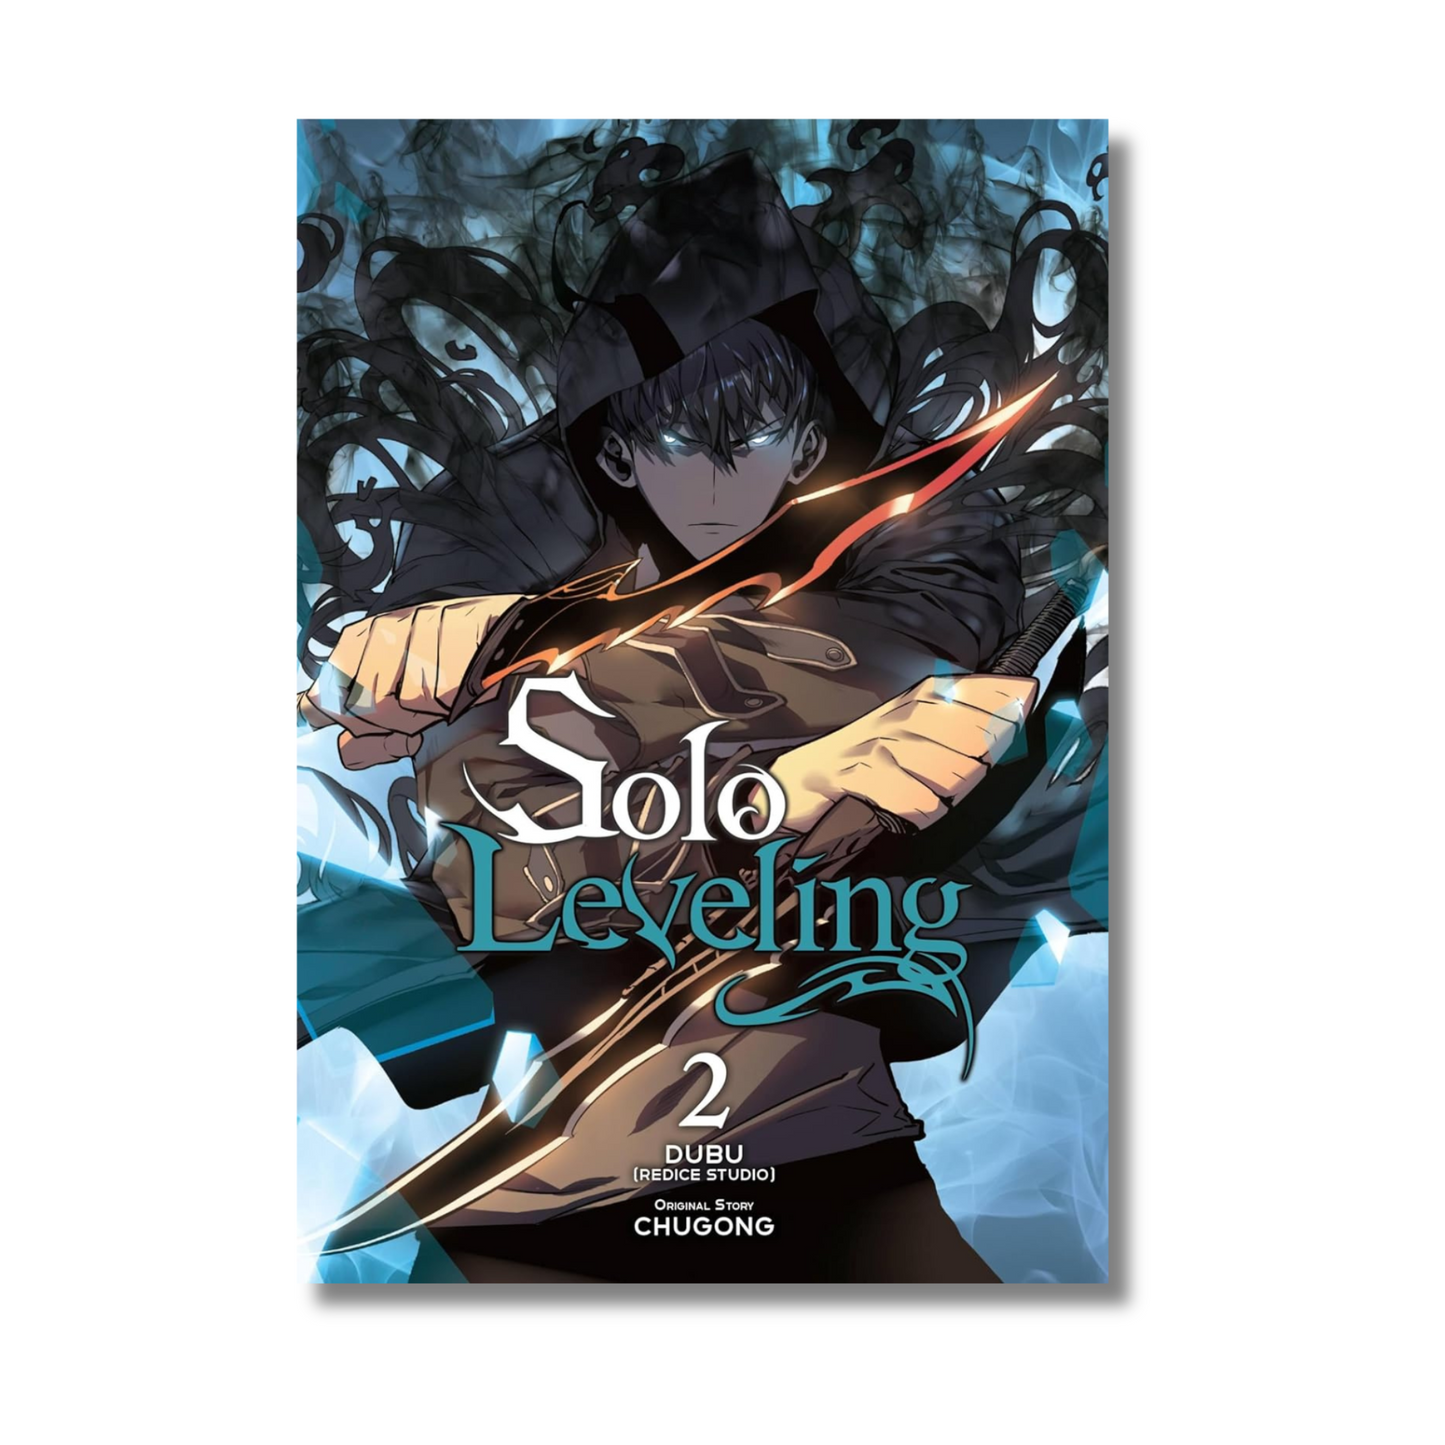 Solo Leveling Vol 2 by Chugong (Black and White, Paperback)